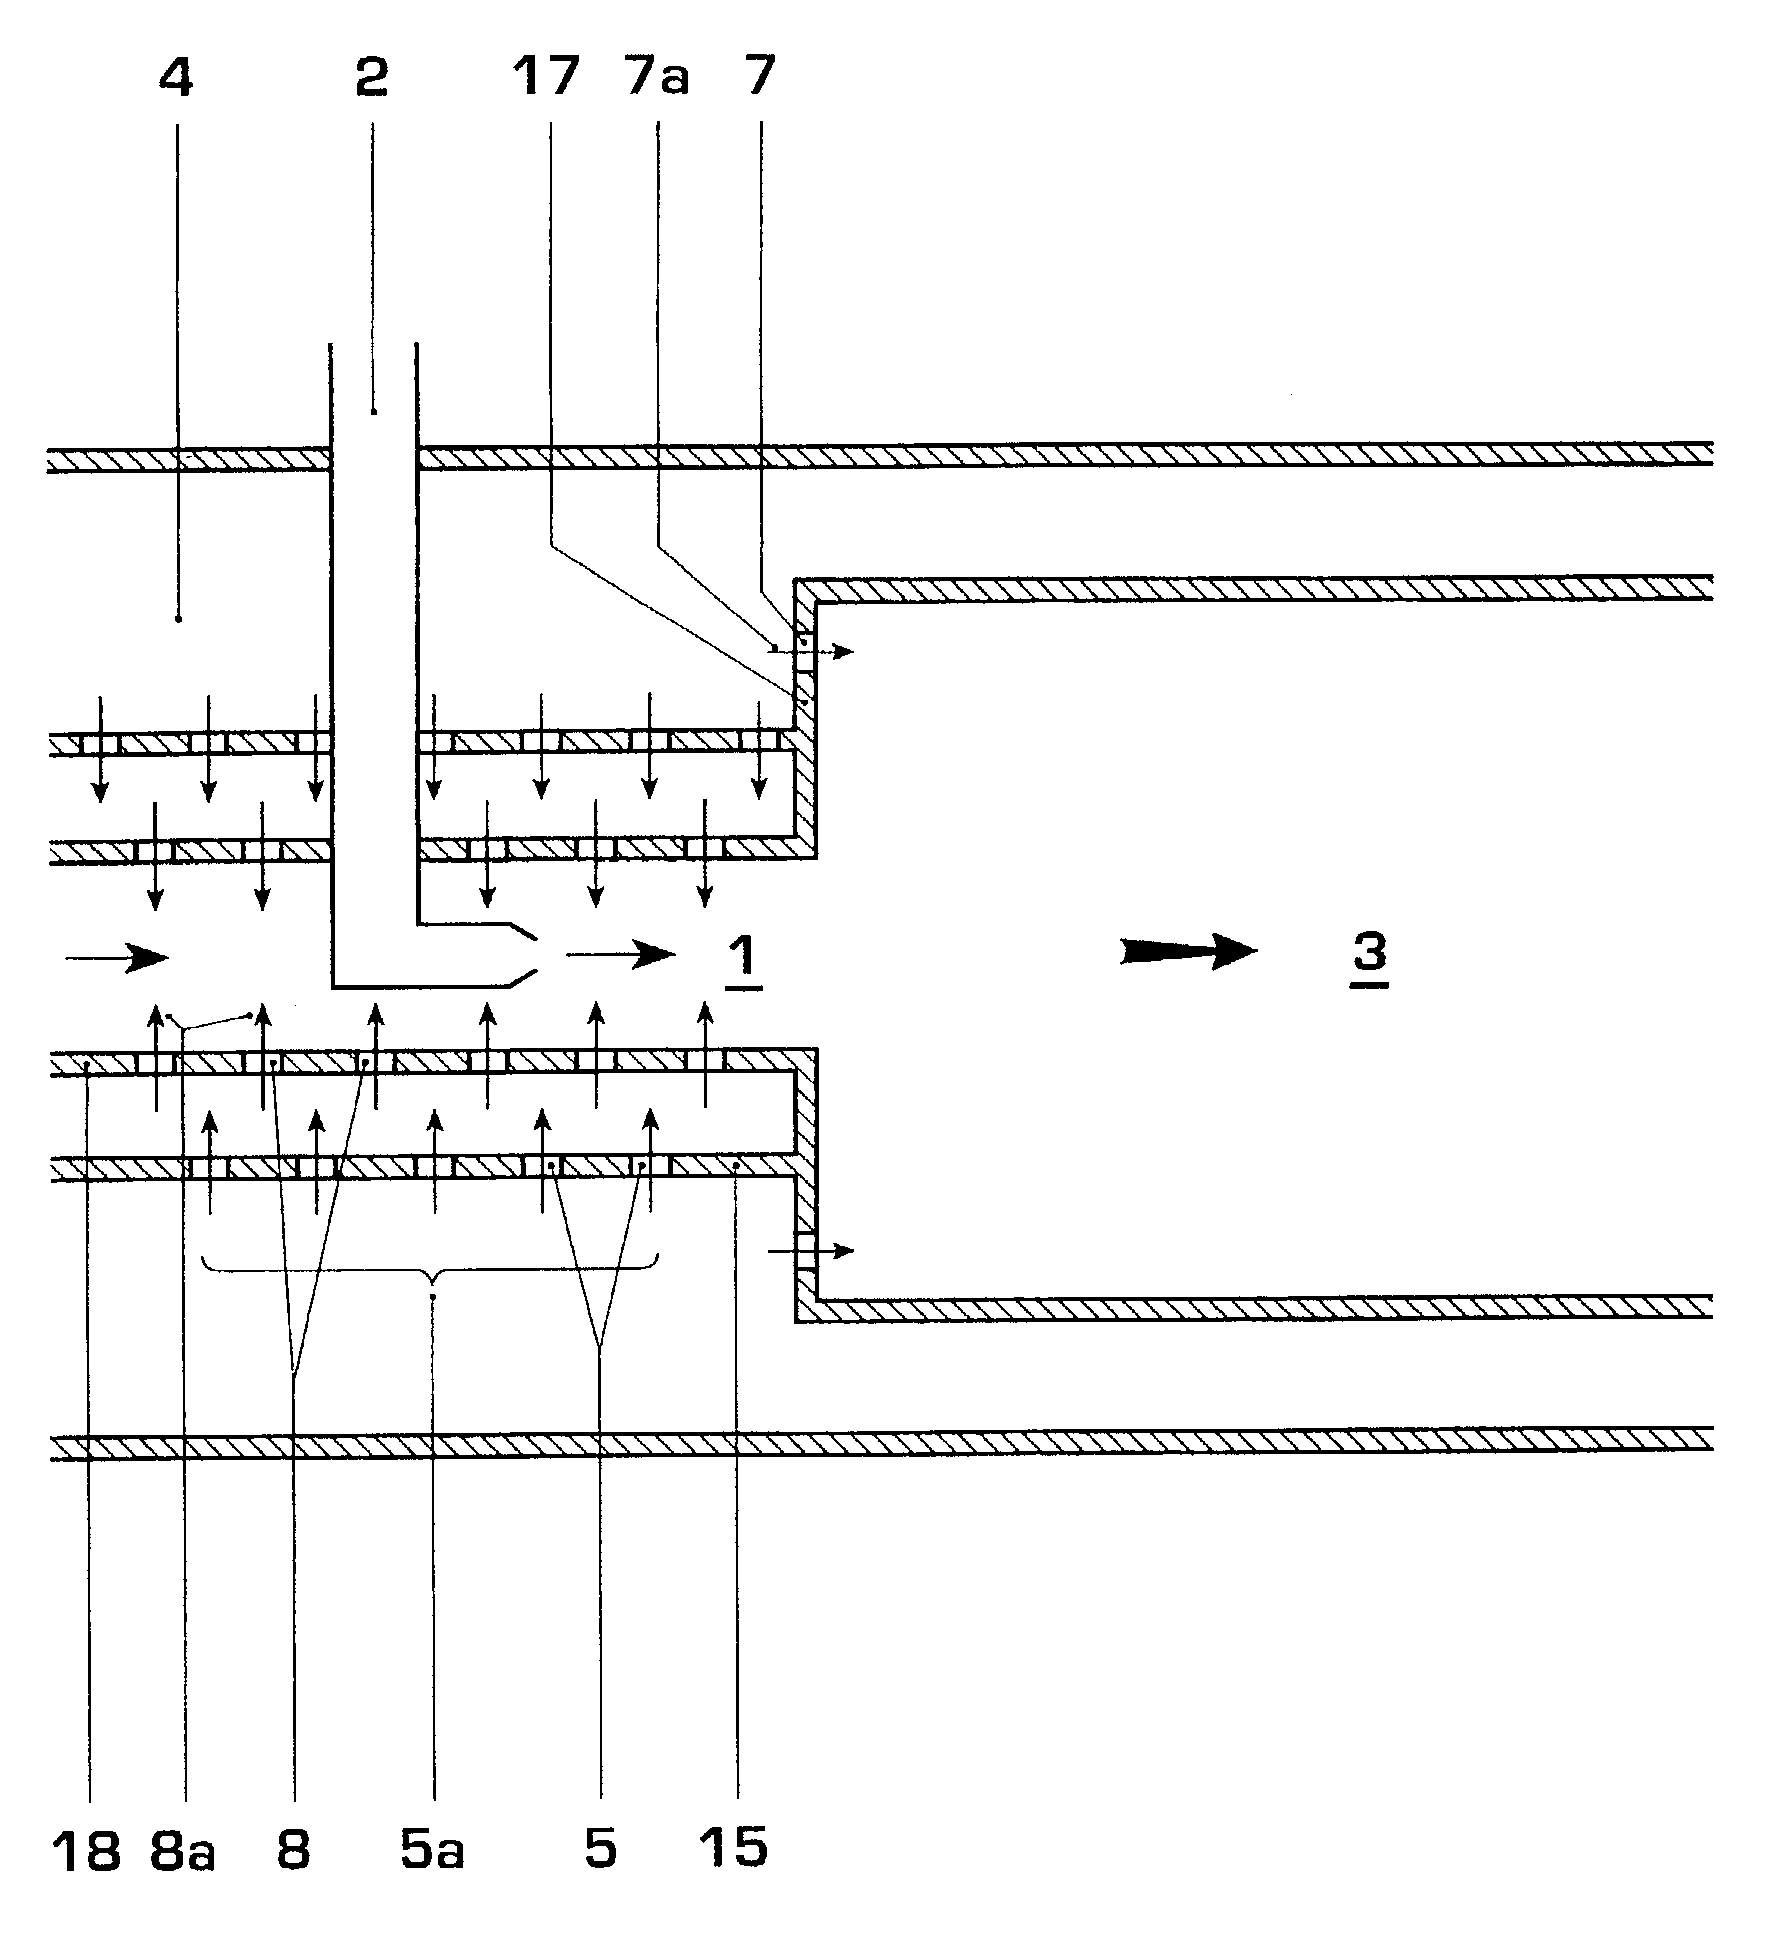 Reheat combustion system for a gas turbine